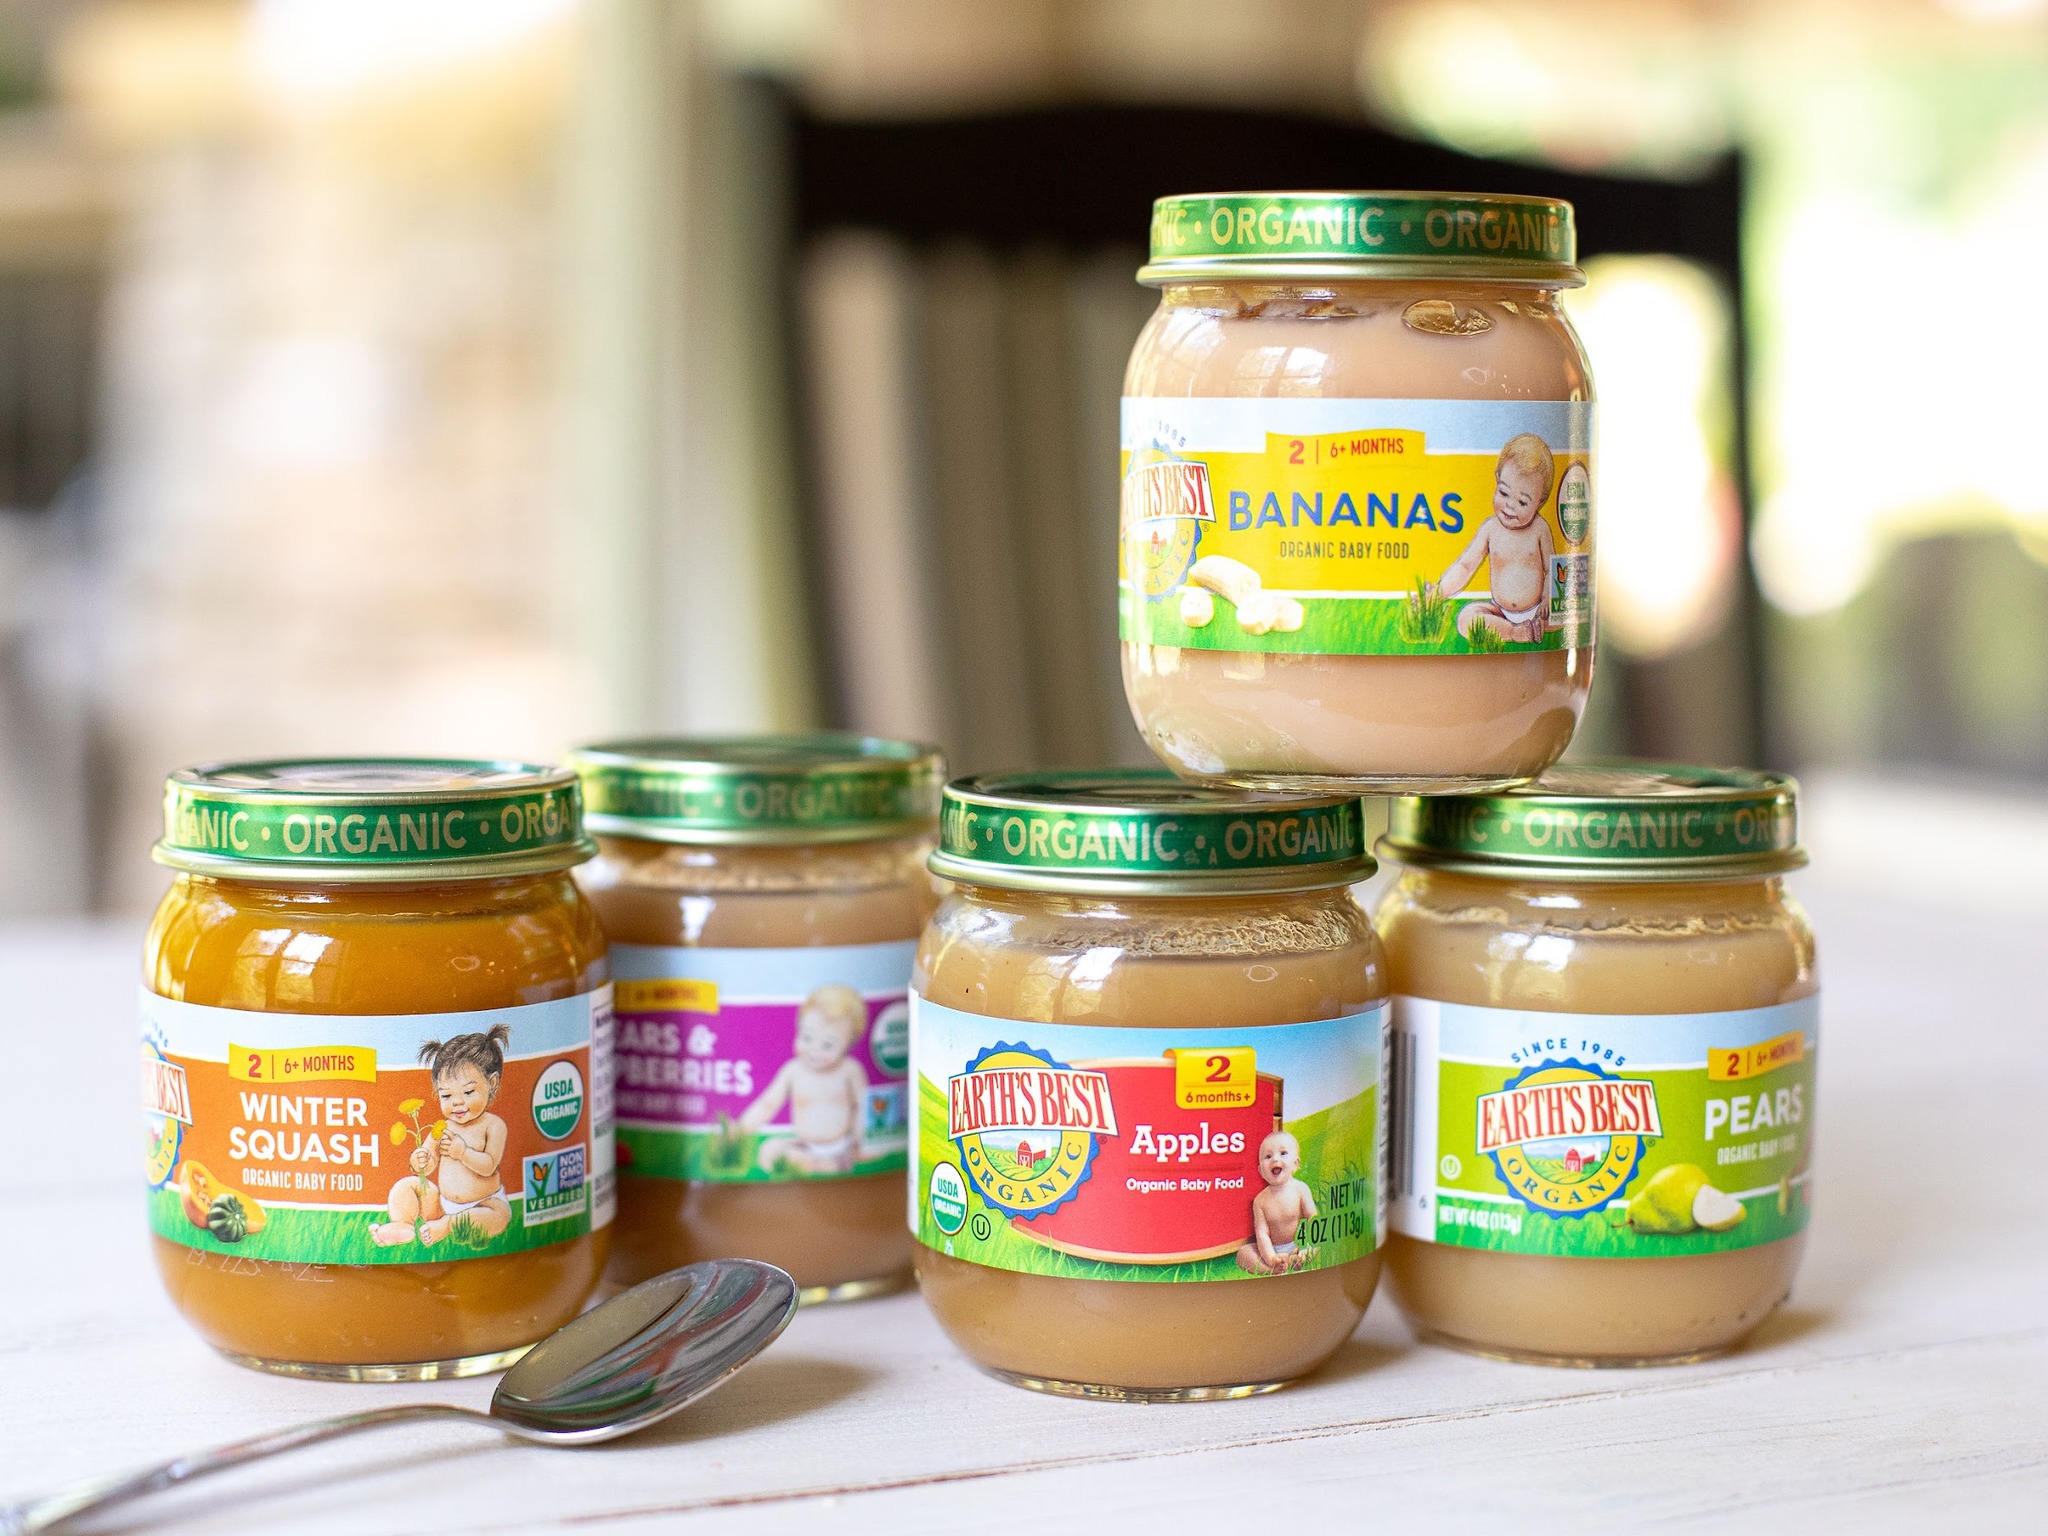 Earth’s Best Organic Baby Food As Low As 73¢ Per Jar At Publix